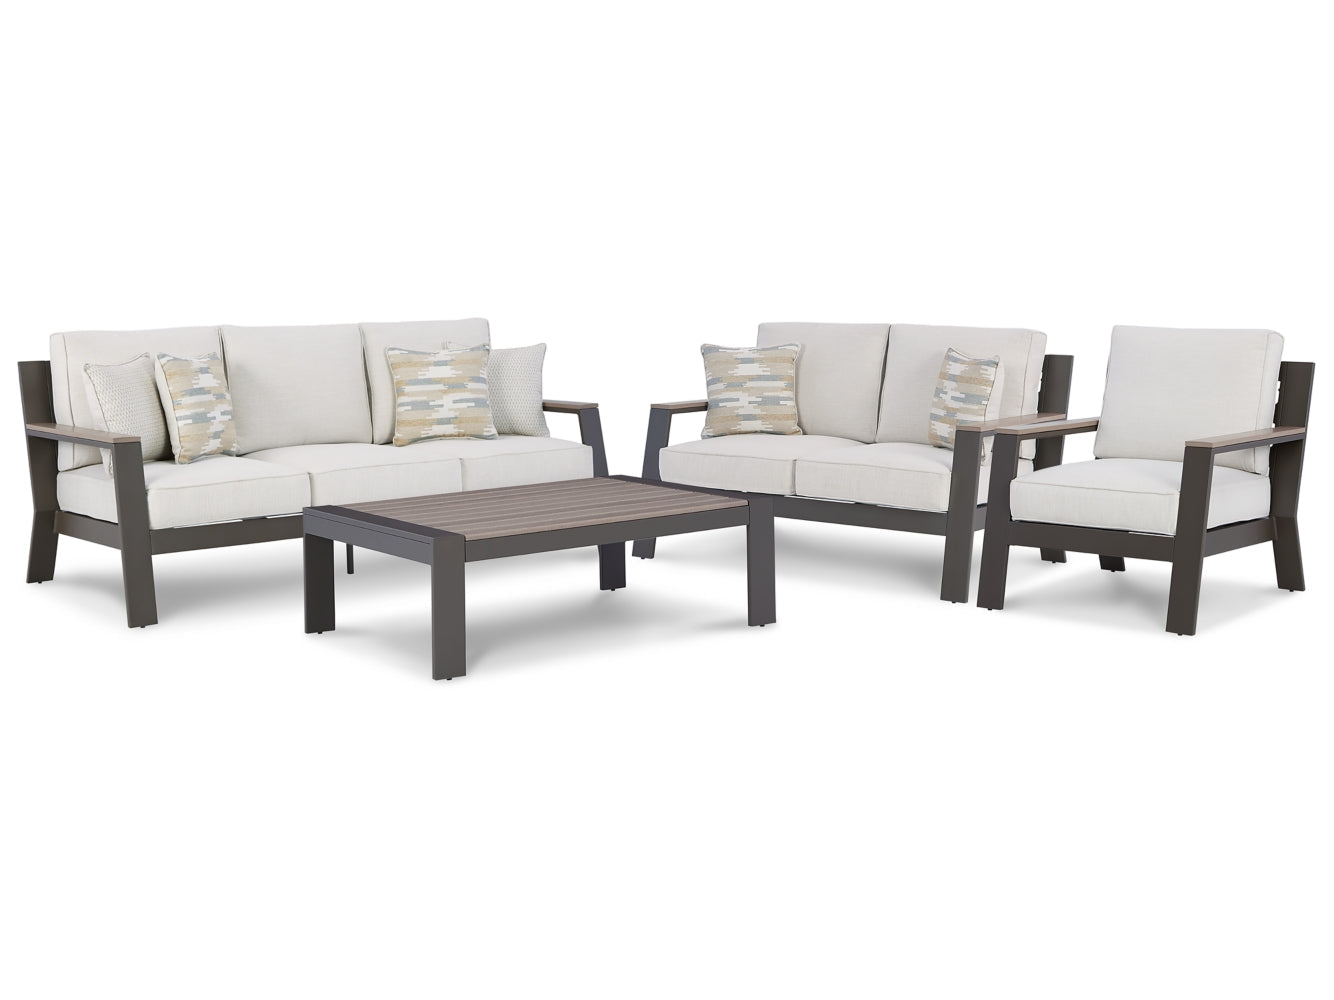 Tropicava Outdoor Sofa, Loveseat and Lounge Chair with Coffee Table - furniture place usa